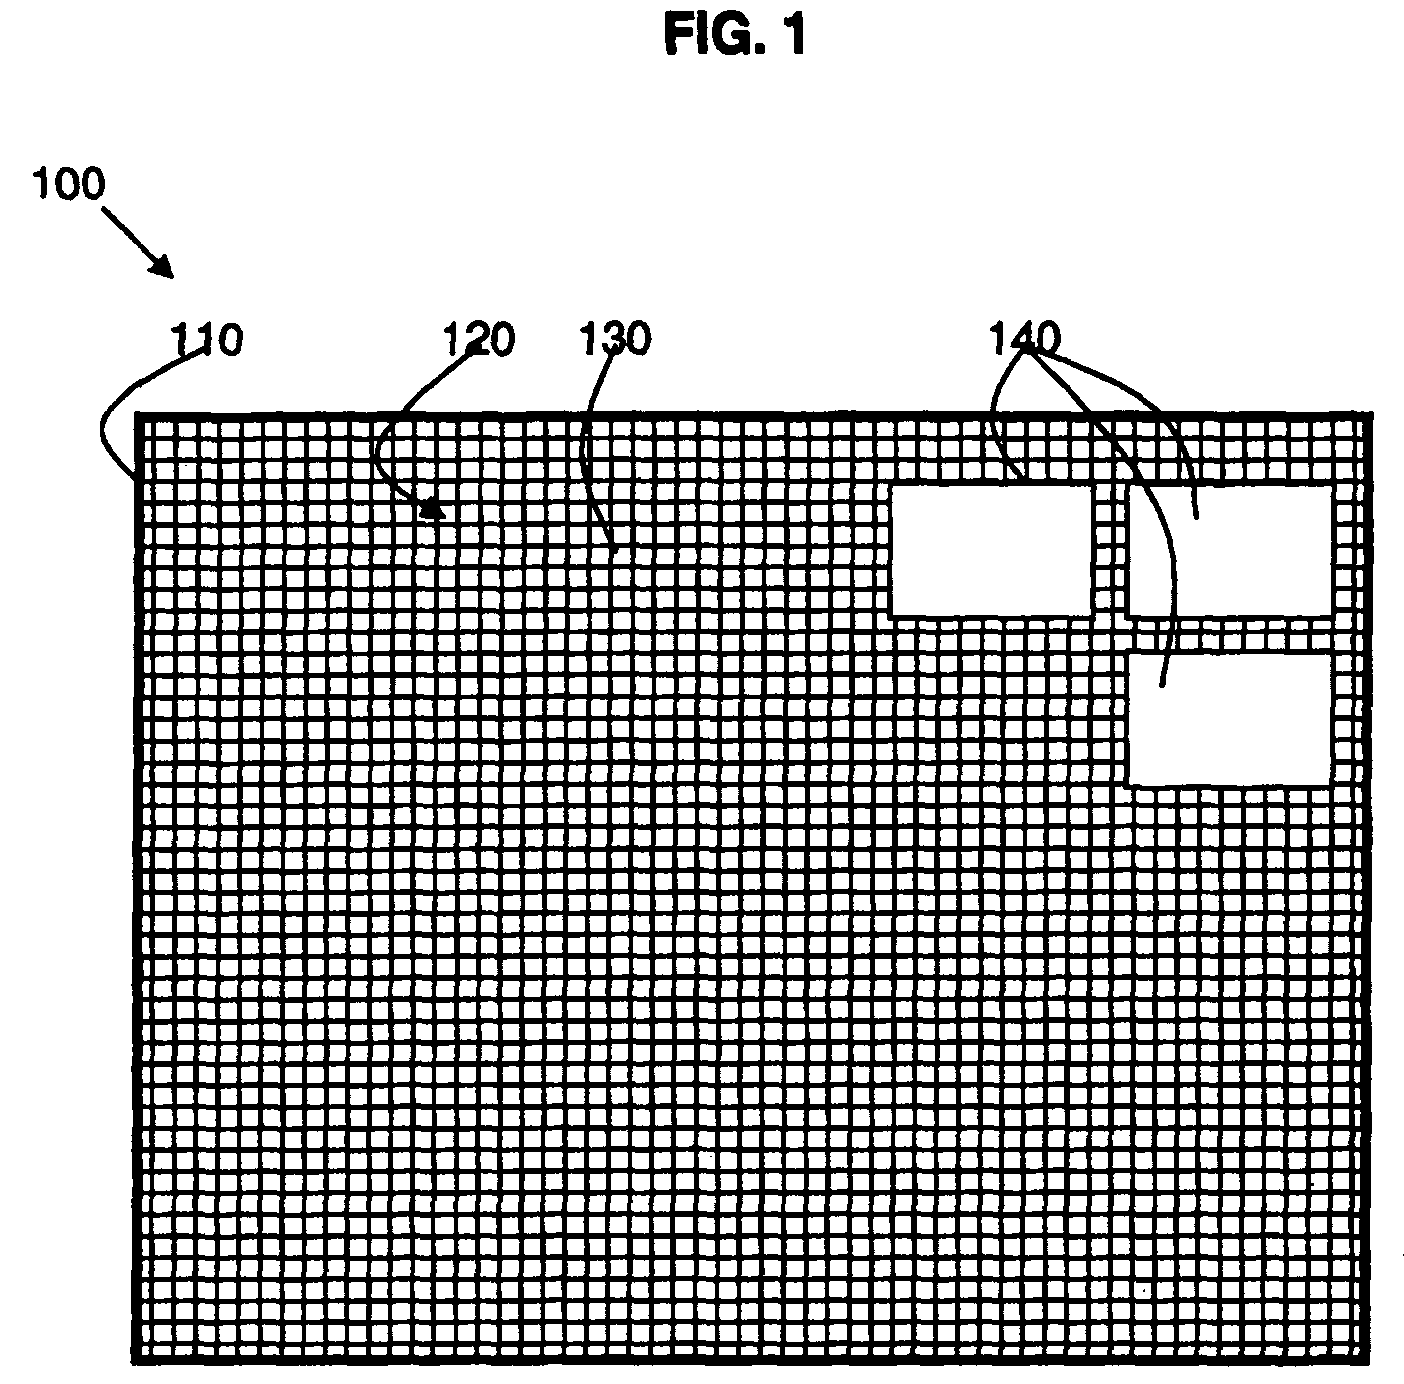 Method and system for re-arranging a display